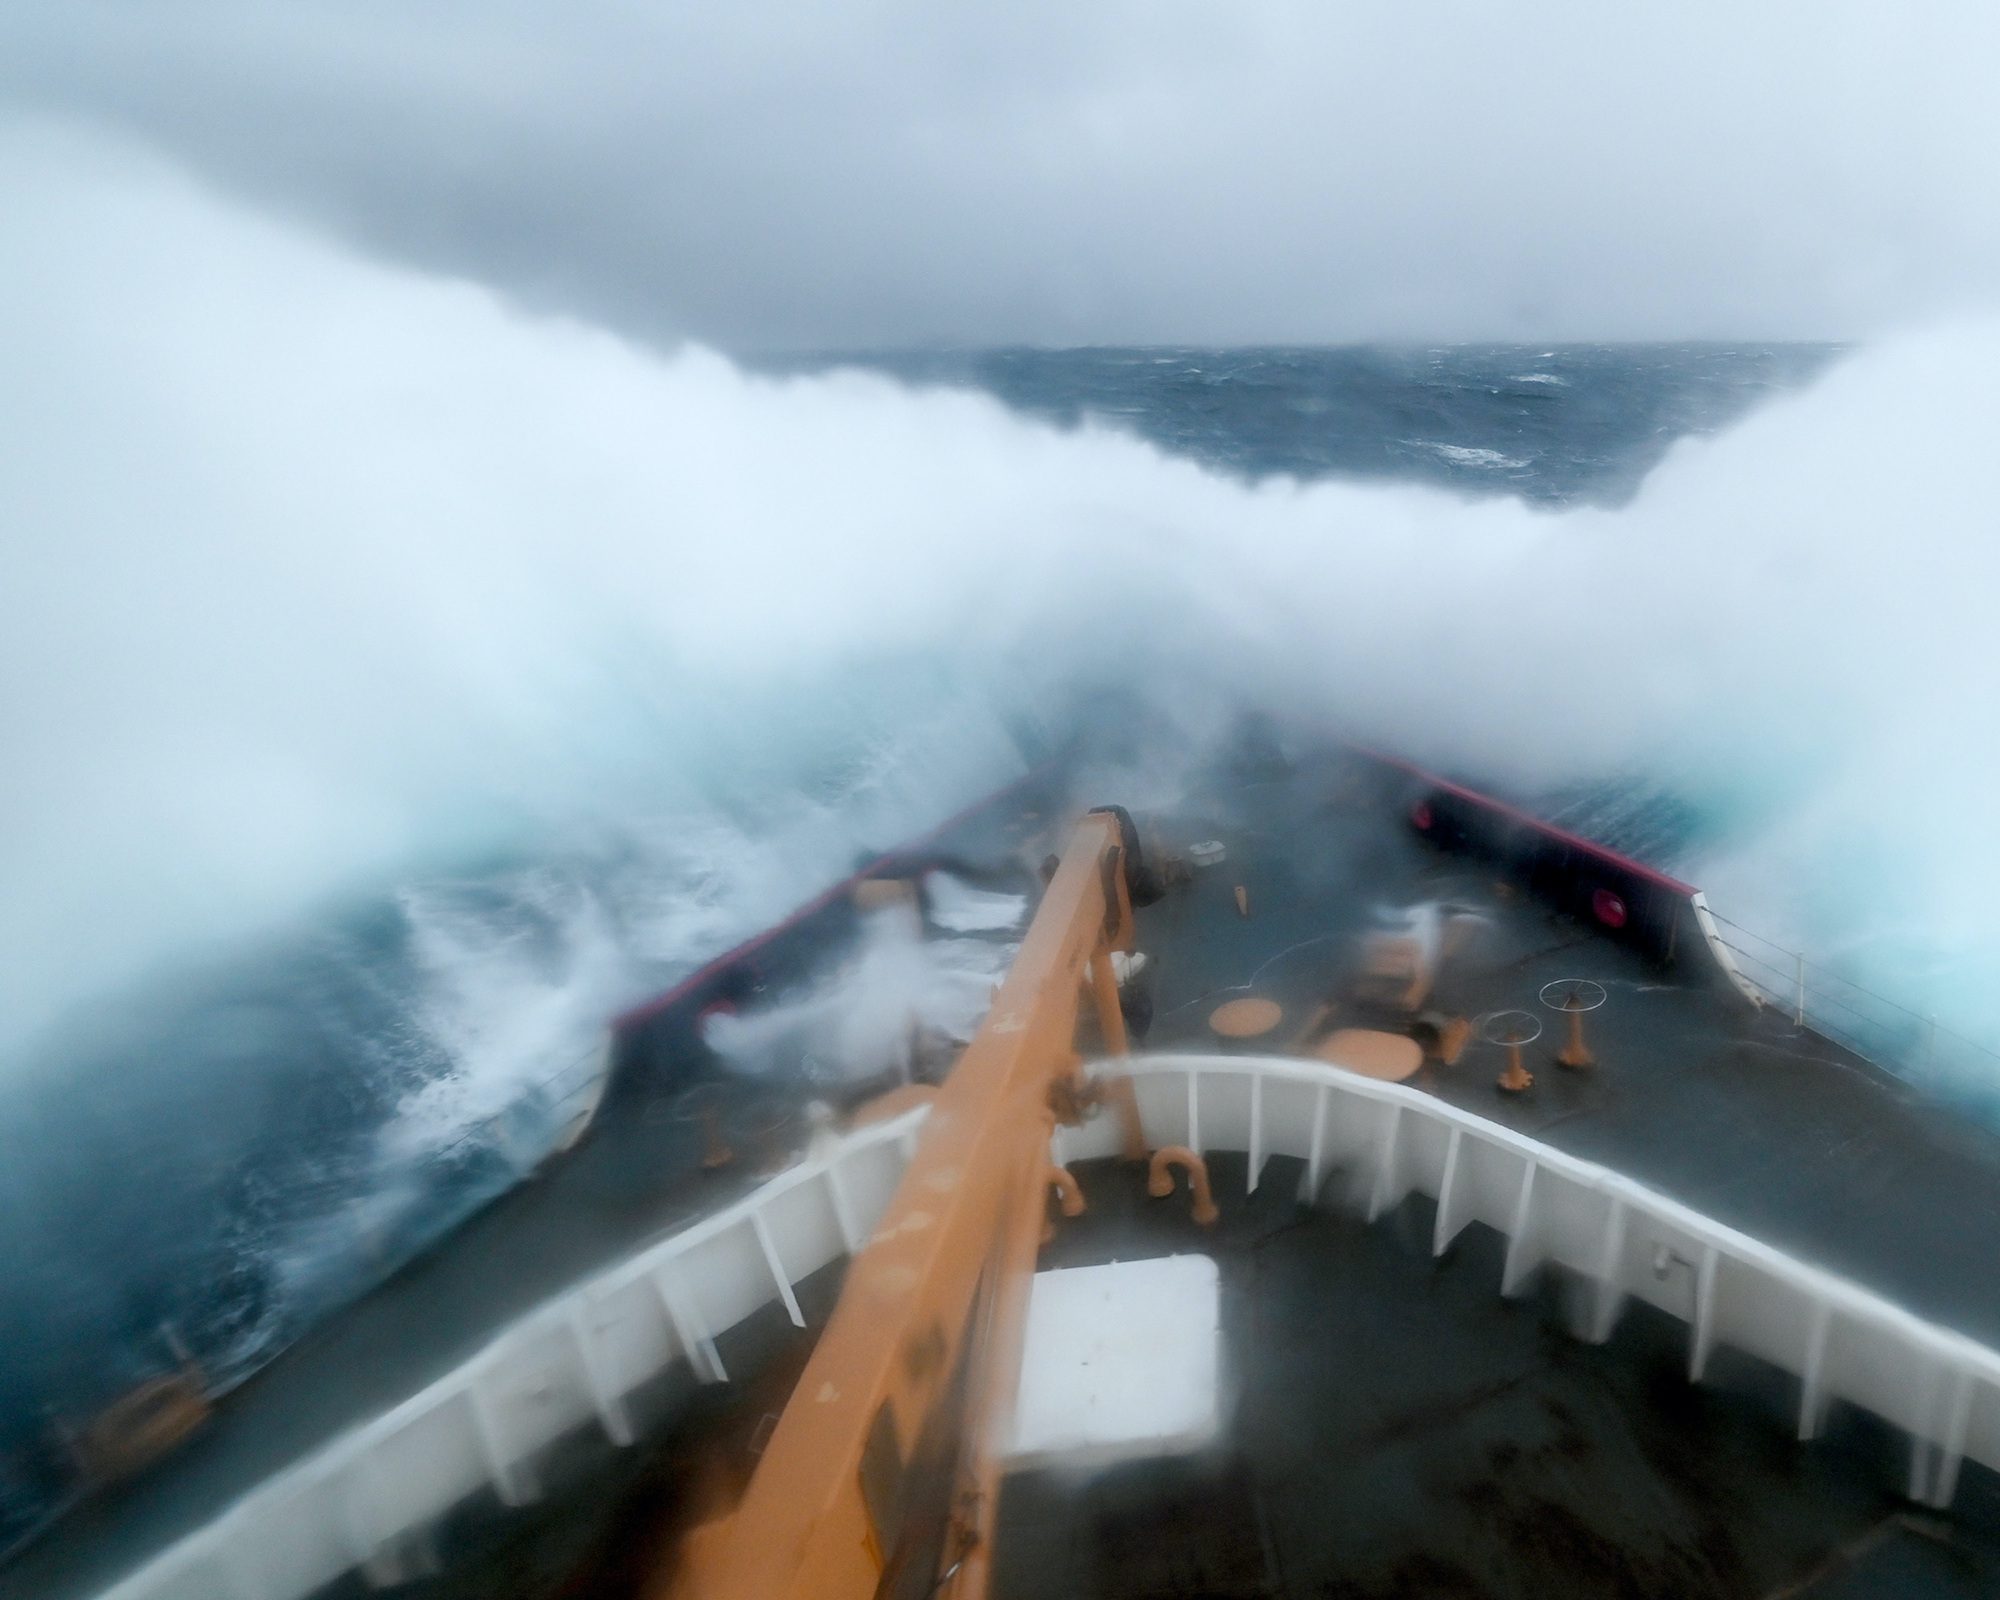 The Deadliest Catch Is About To Get Deadlier As Arctic Thunderstorms Are Predicted To Intensify